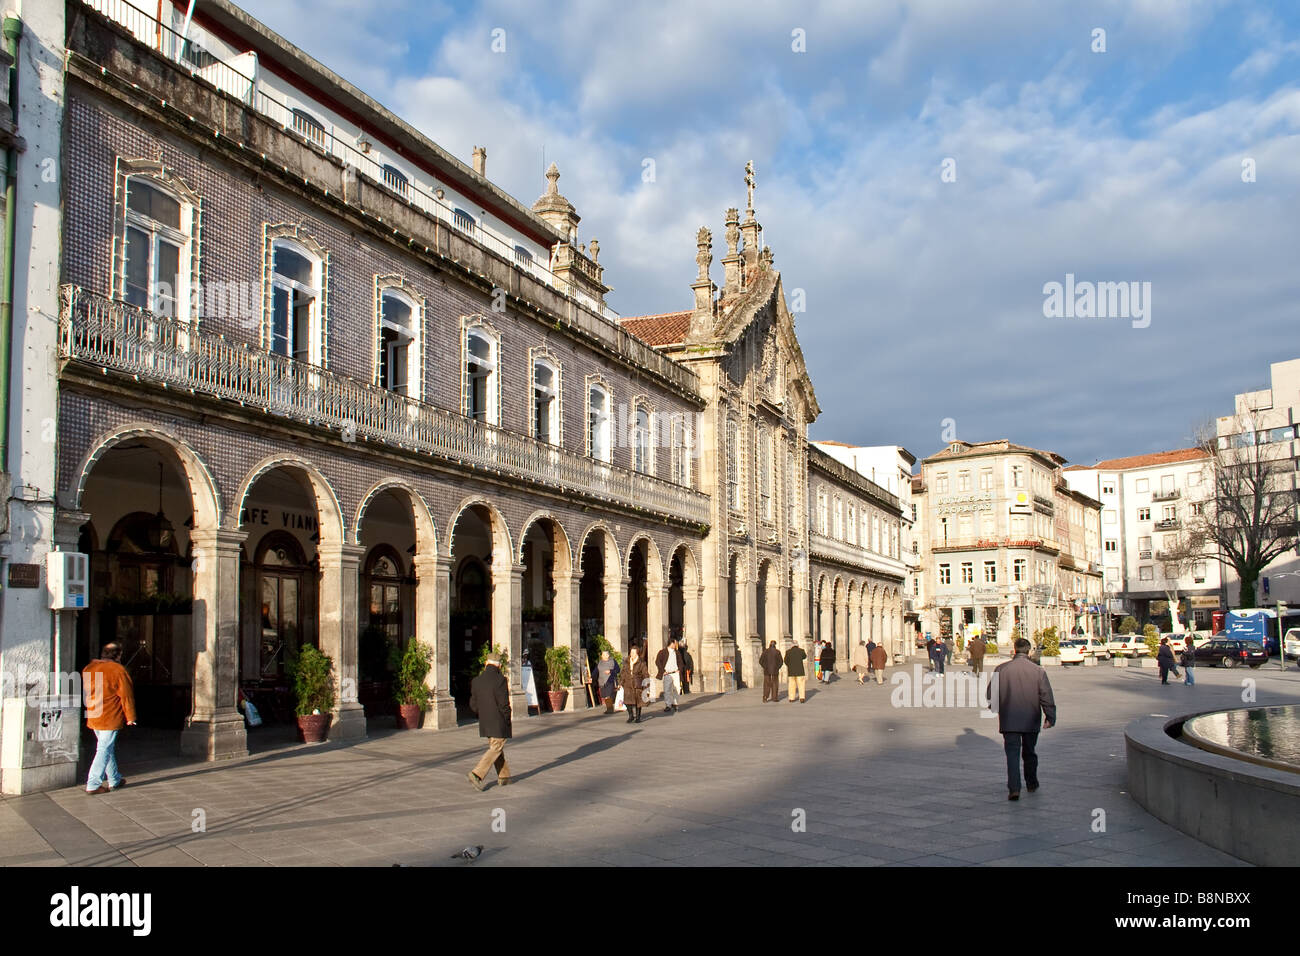 Arcadas Palace and Lapa church in Braga city, Portugal. The arcades are used by commerce namely by the famous Café Vianna. Stock Photo